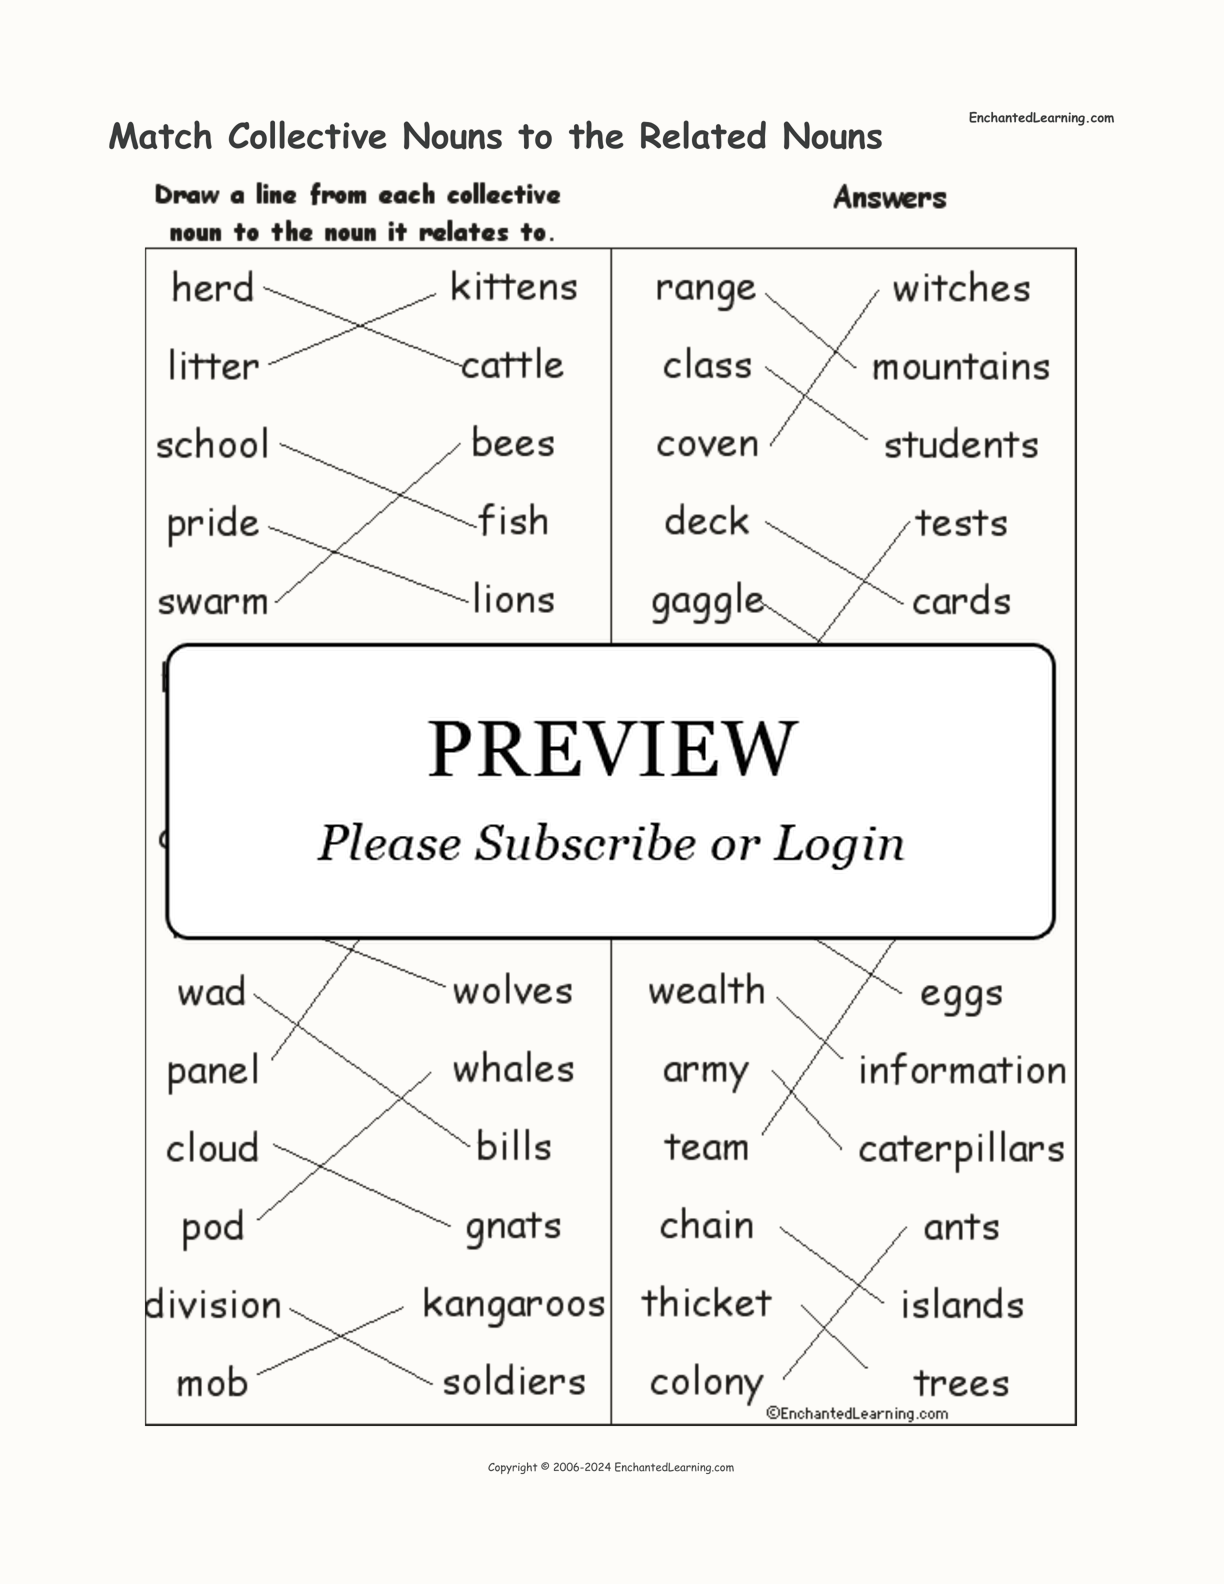 Match Collective Nouns to the Related Nouns interactive worksheet page 2